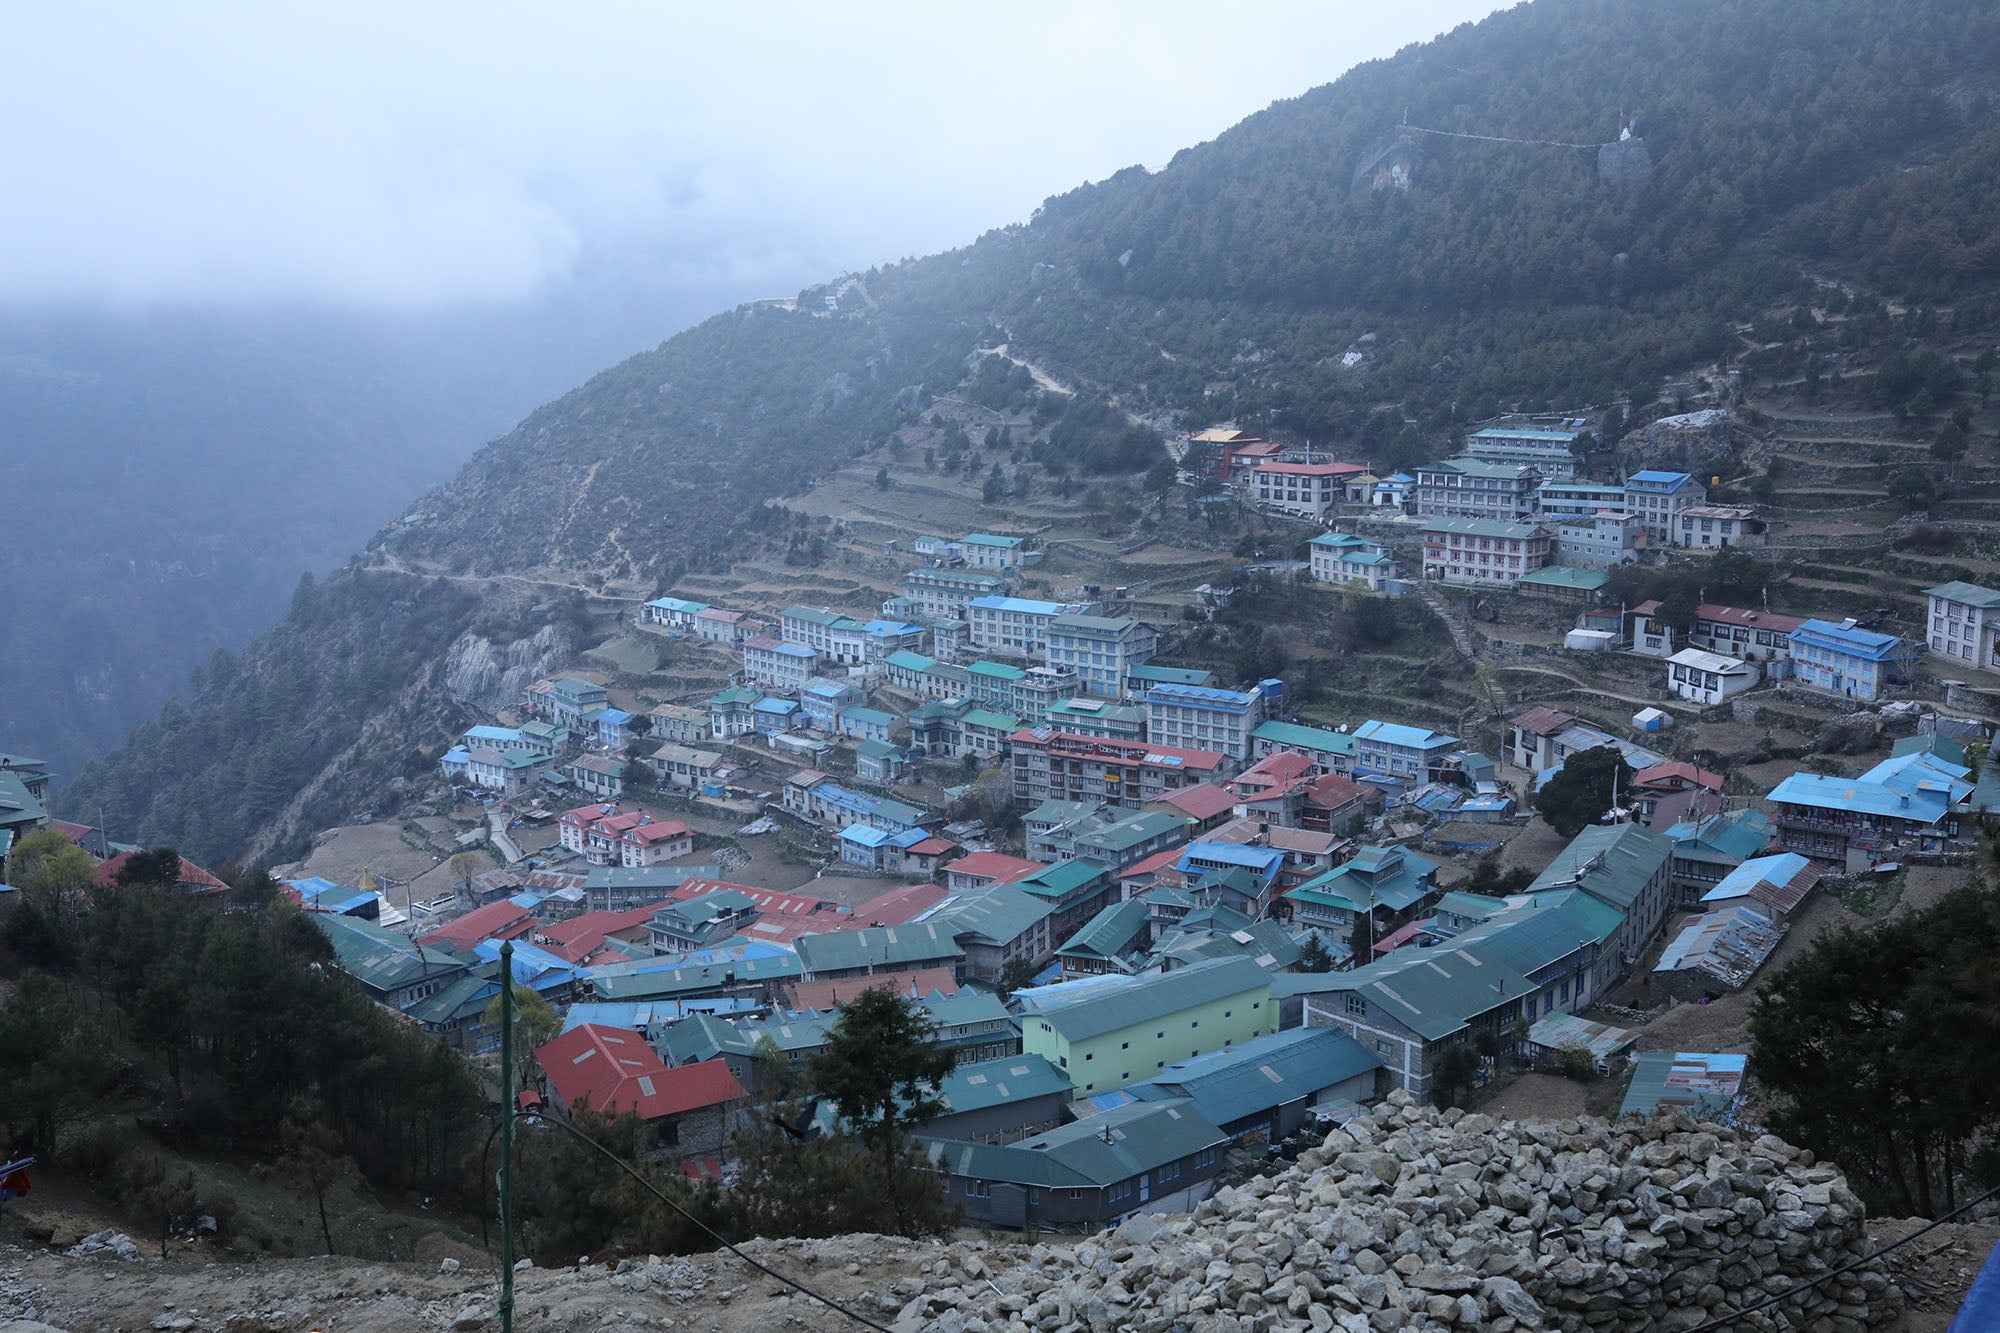 In photos: The widespread threats of melting Himalayan glaciers